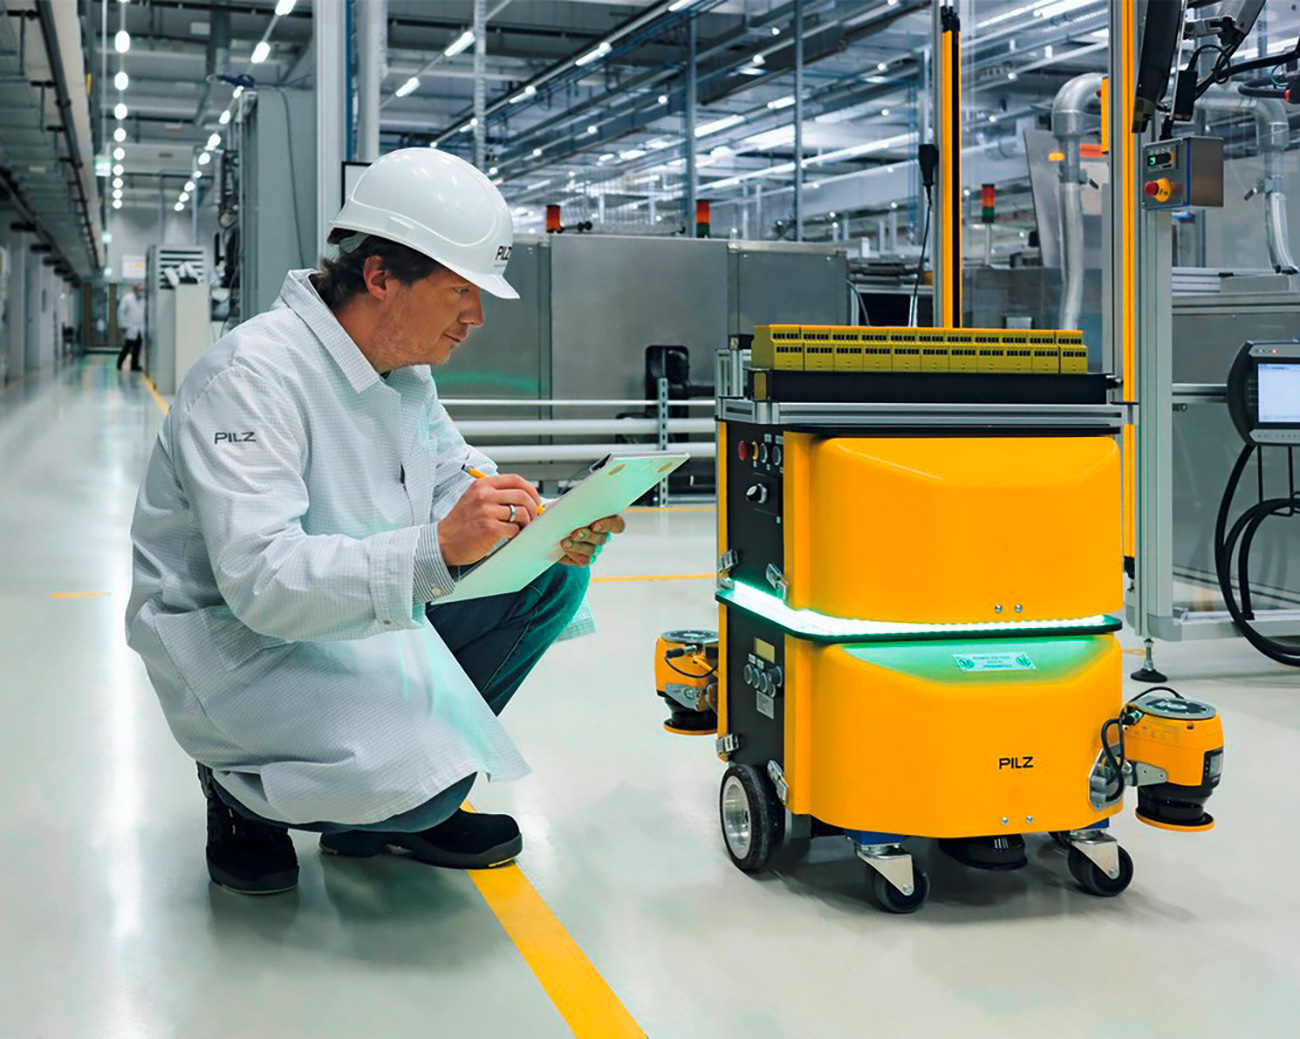 F_Press_A_Material_Handling_AGV_with_PSENscan_Production_Engineer_with_helmet_coat_IMG_0346_cold1_v0_crop